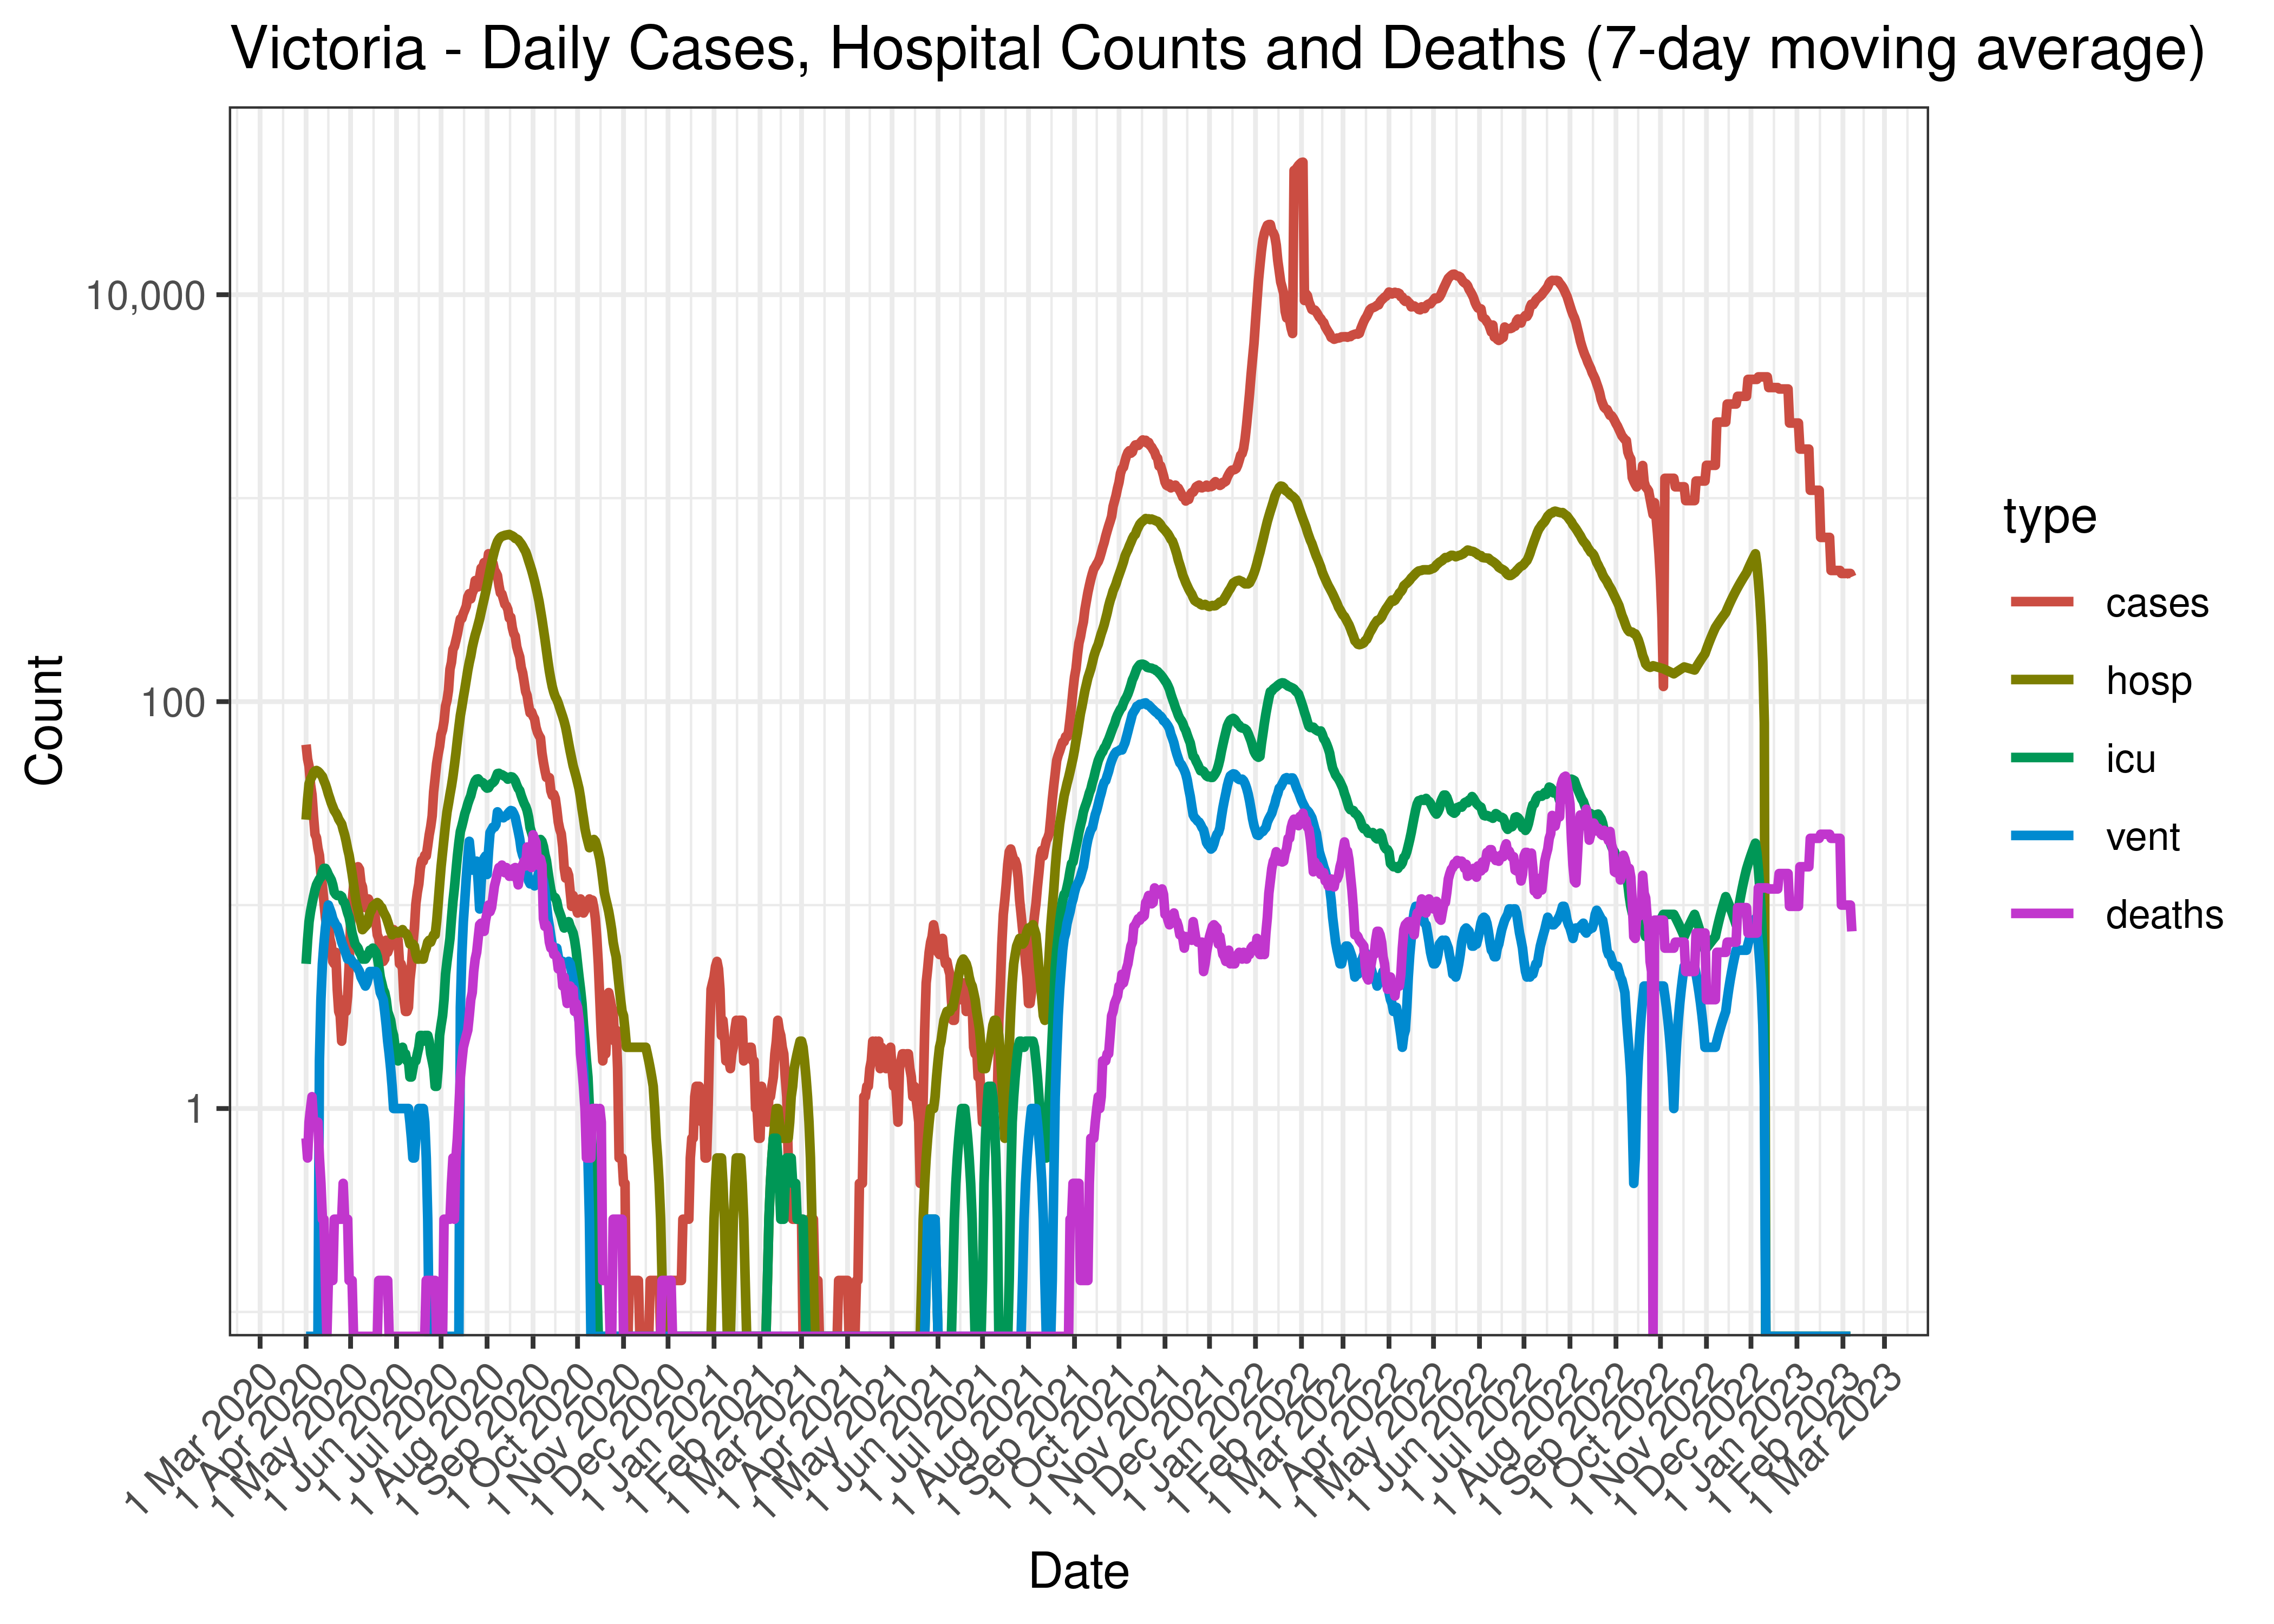 Victoria - Daily Cases, Hospital Counts and Deaths (7-day moving average)